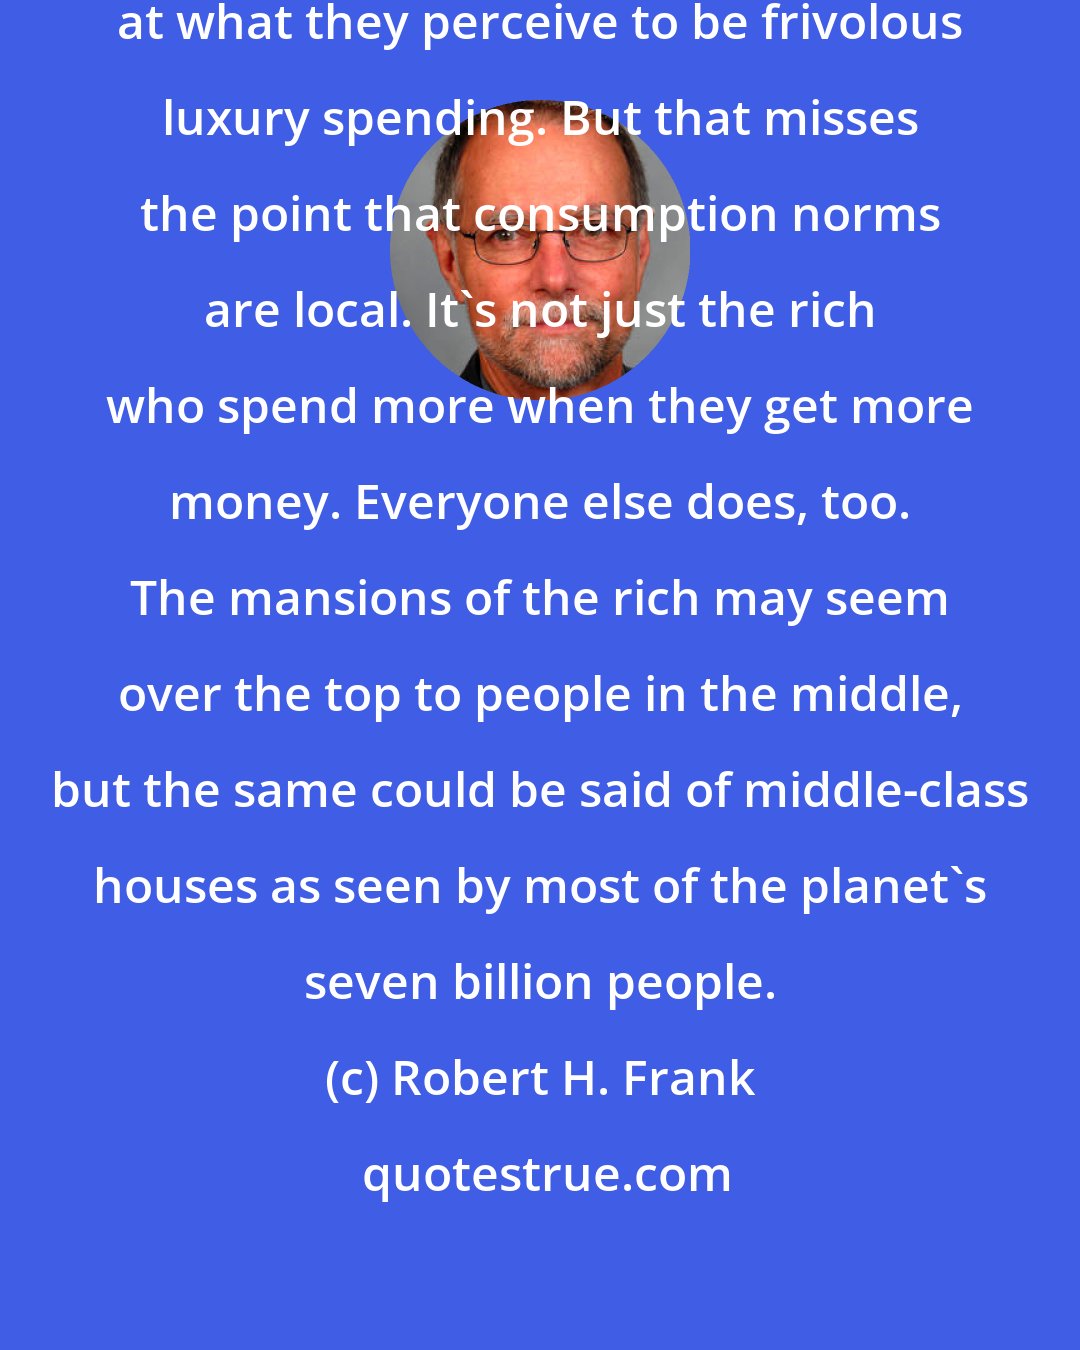 Robert H. Frank: Many social critics wag their fingers at what they perceive to be frivolous luxury spending. But that misses the point that consumption norms are local. It's not just the rich who spend more when they get more money. Everyone else does, too. The mansions of the rich may seem over the top to people in the middle, but the same could be said of middle-class houses as seen by most of the planet's seven billion people.